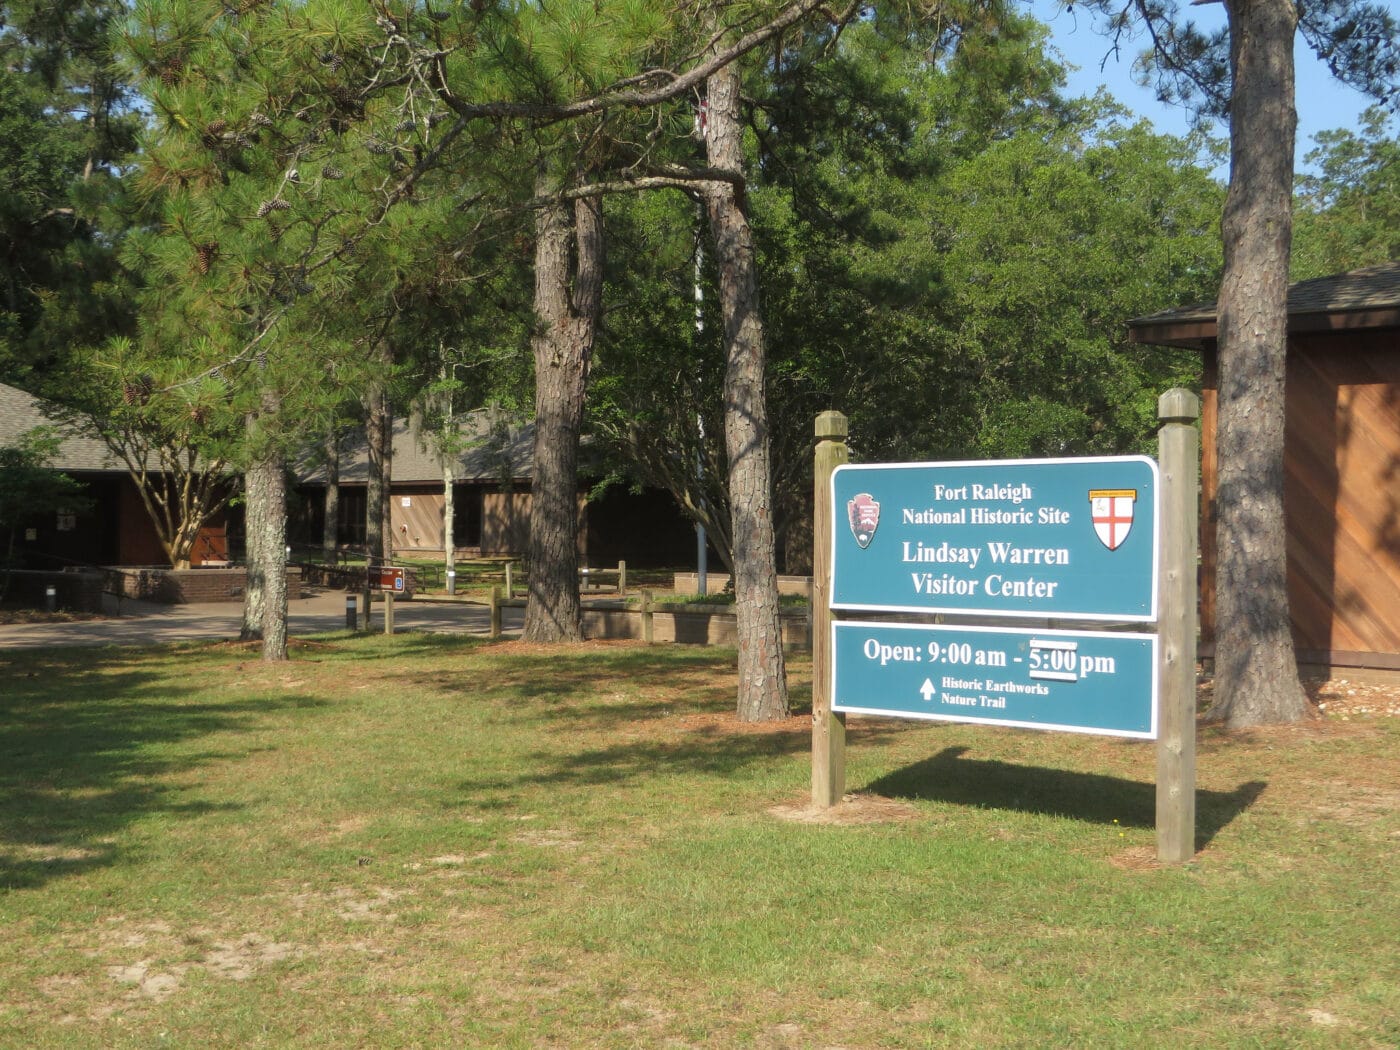 The Fort Raleigh National Park Sign. 